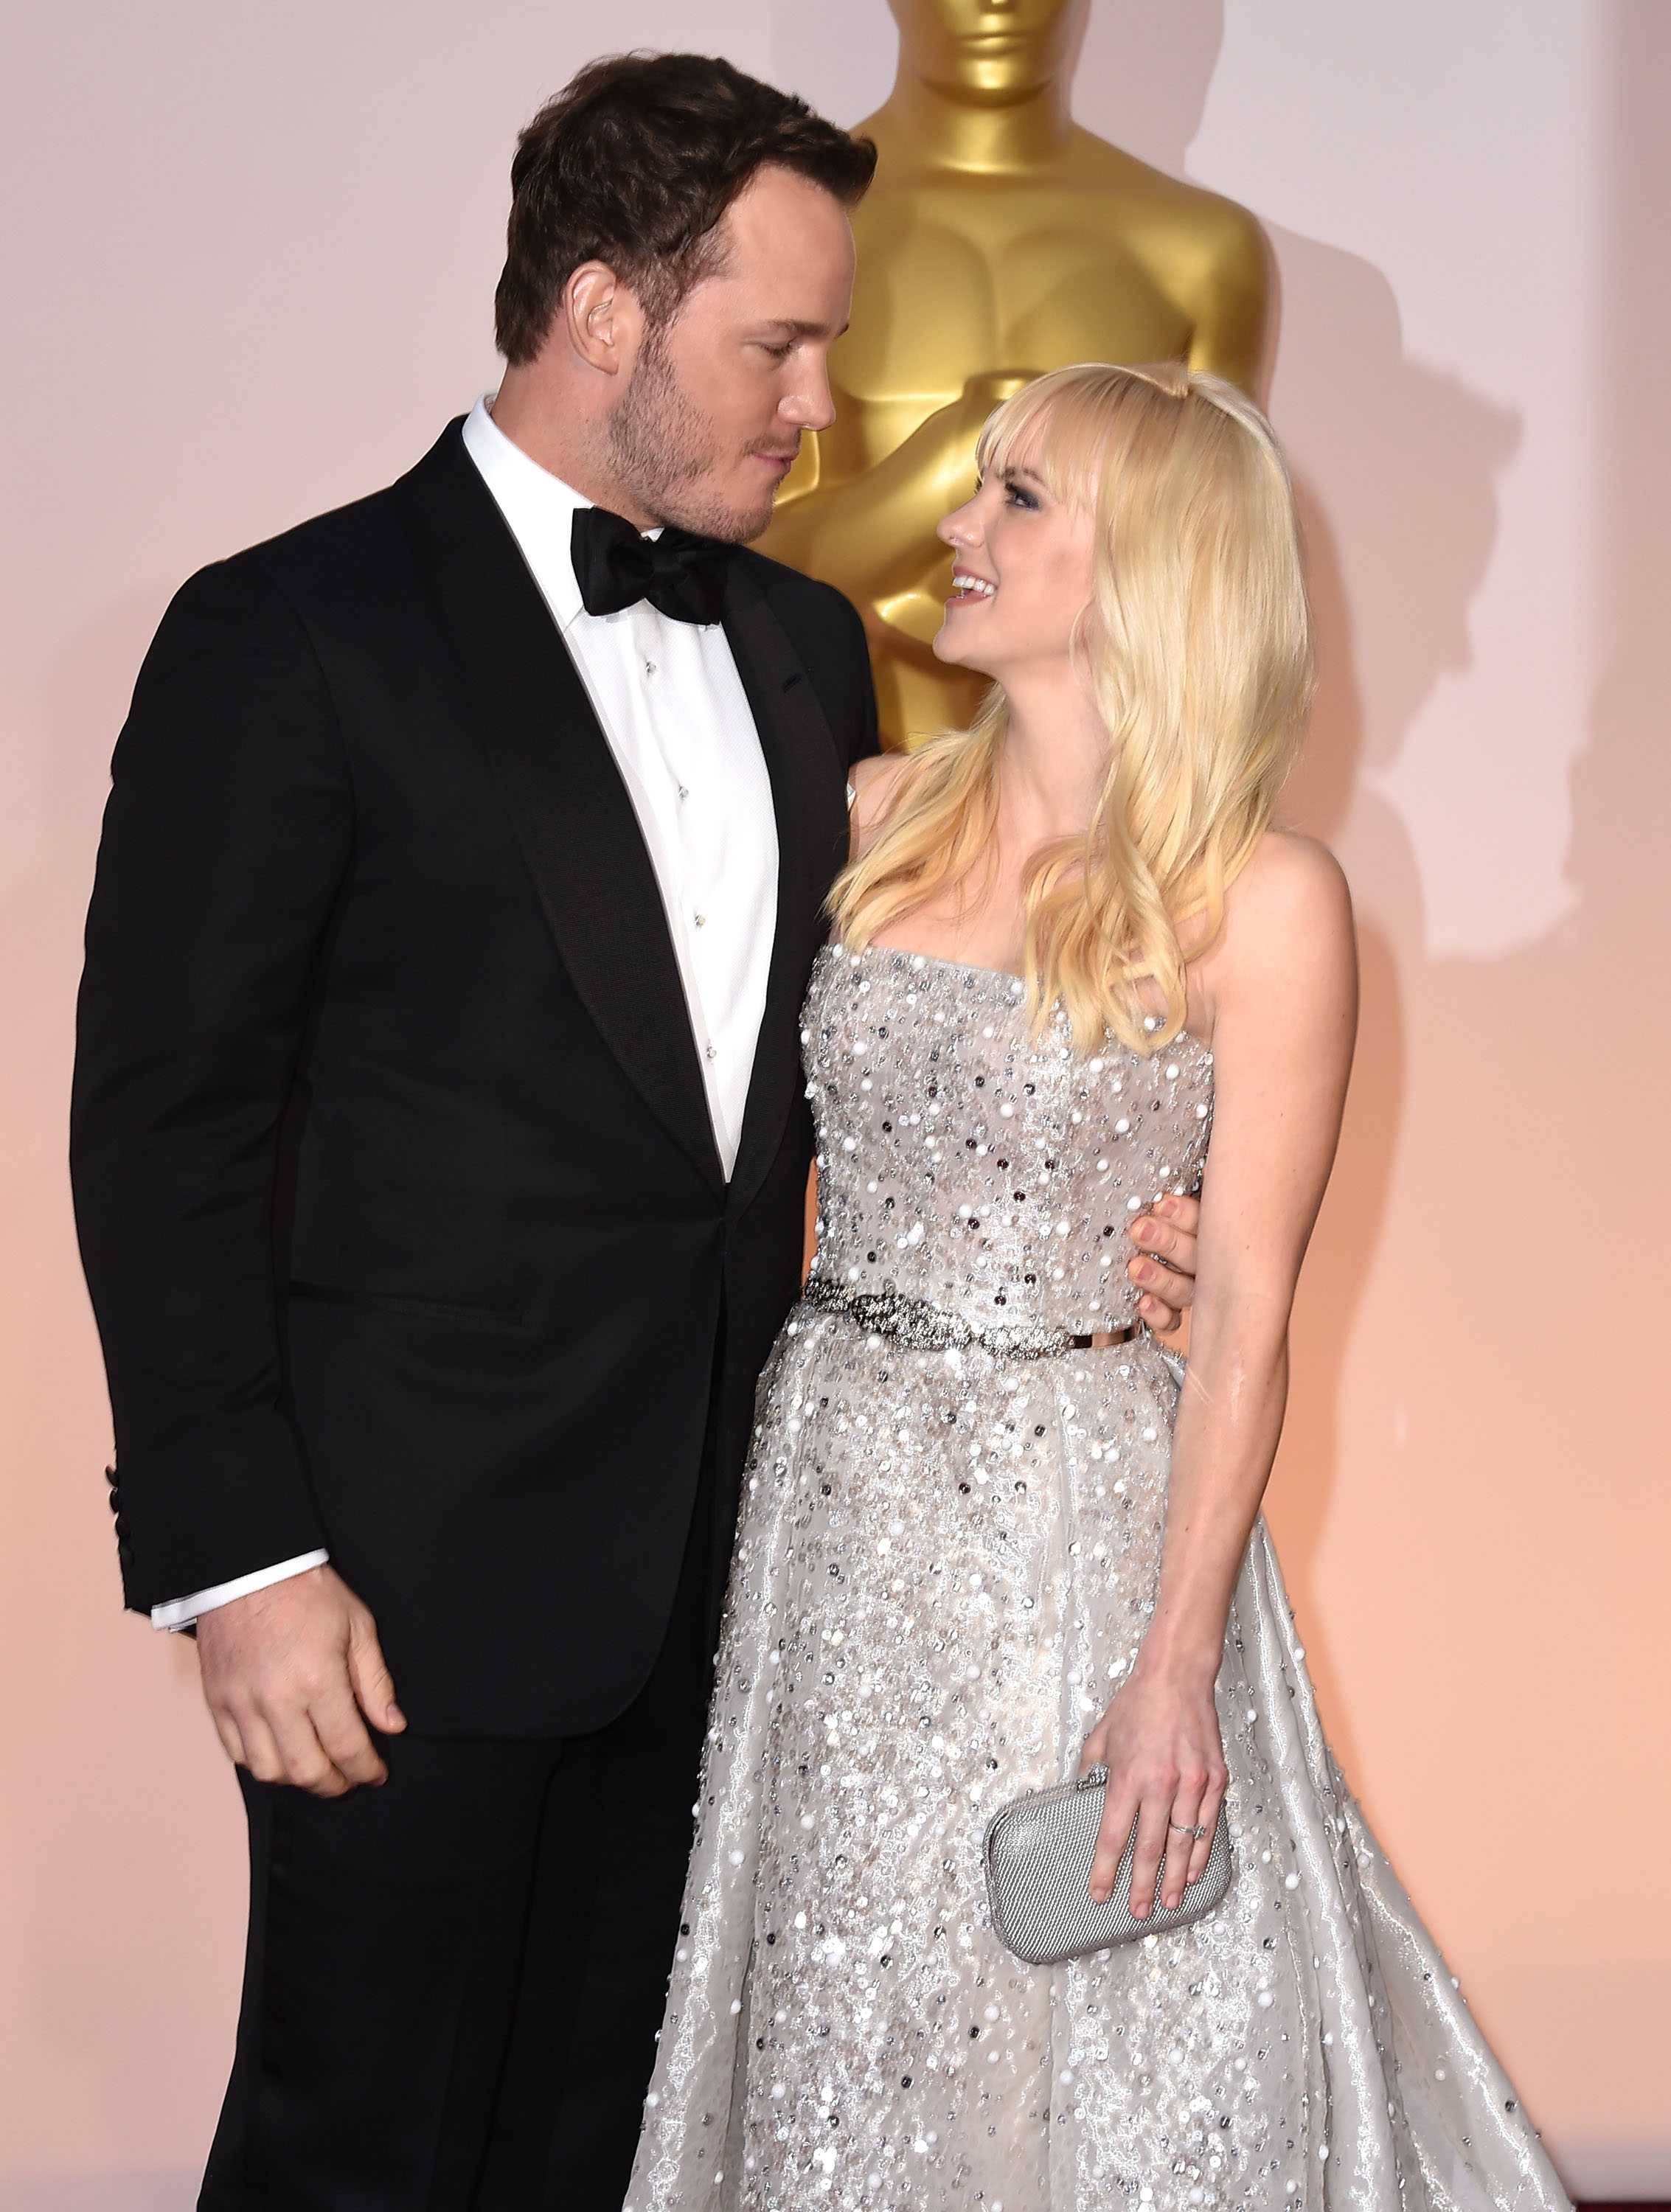 Chris Pratt broke his silence about Anna Faris for the first time since their split